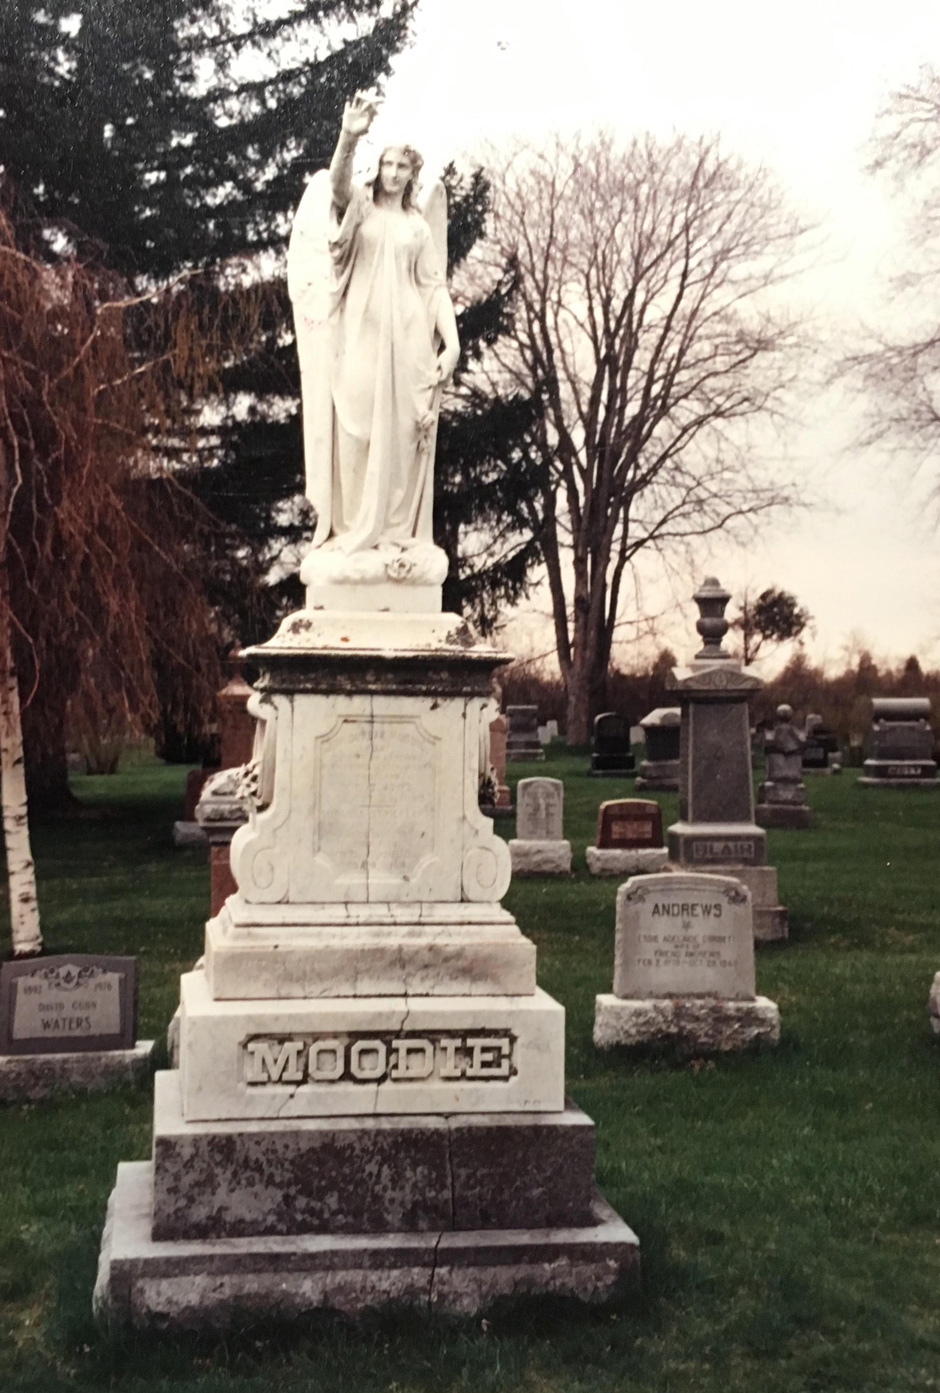 Photo of the Moodie gravestone in the Belleville cemetery